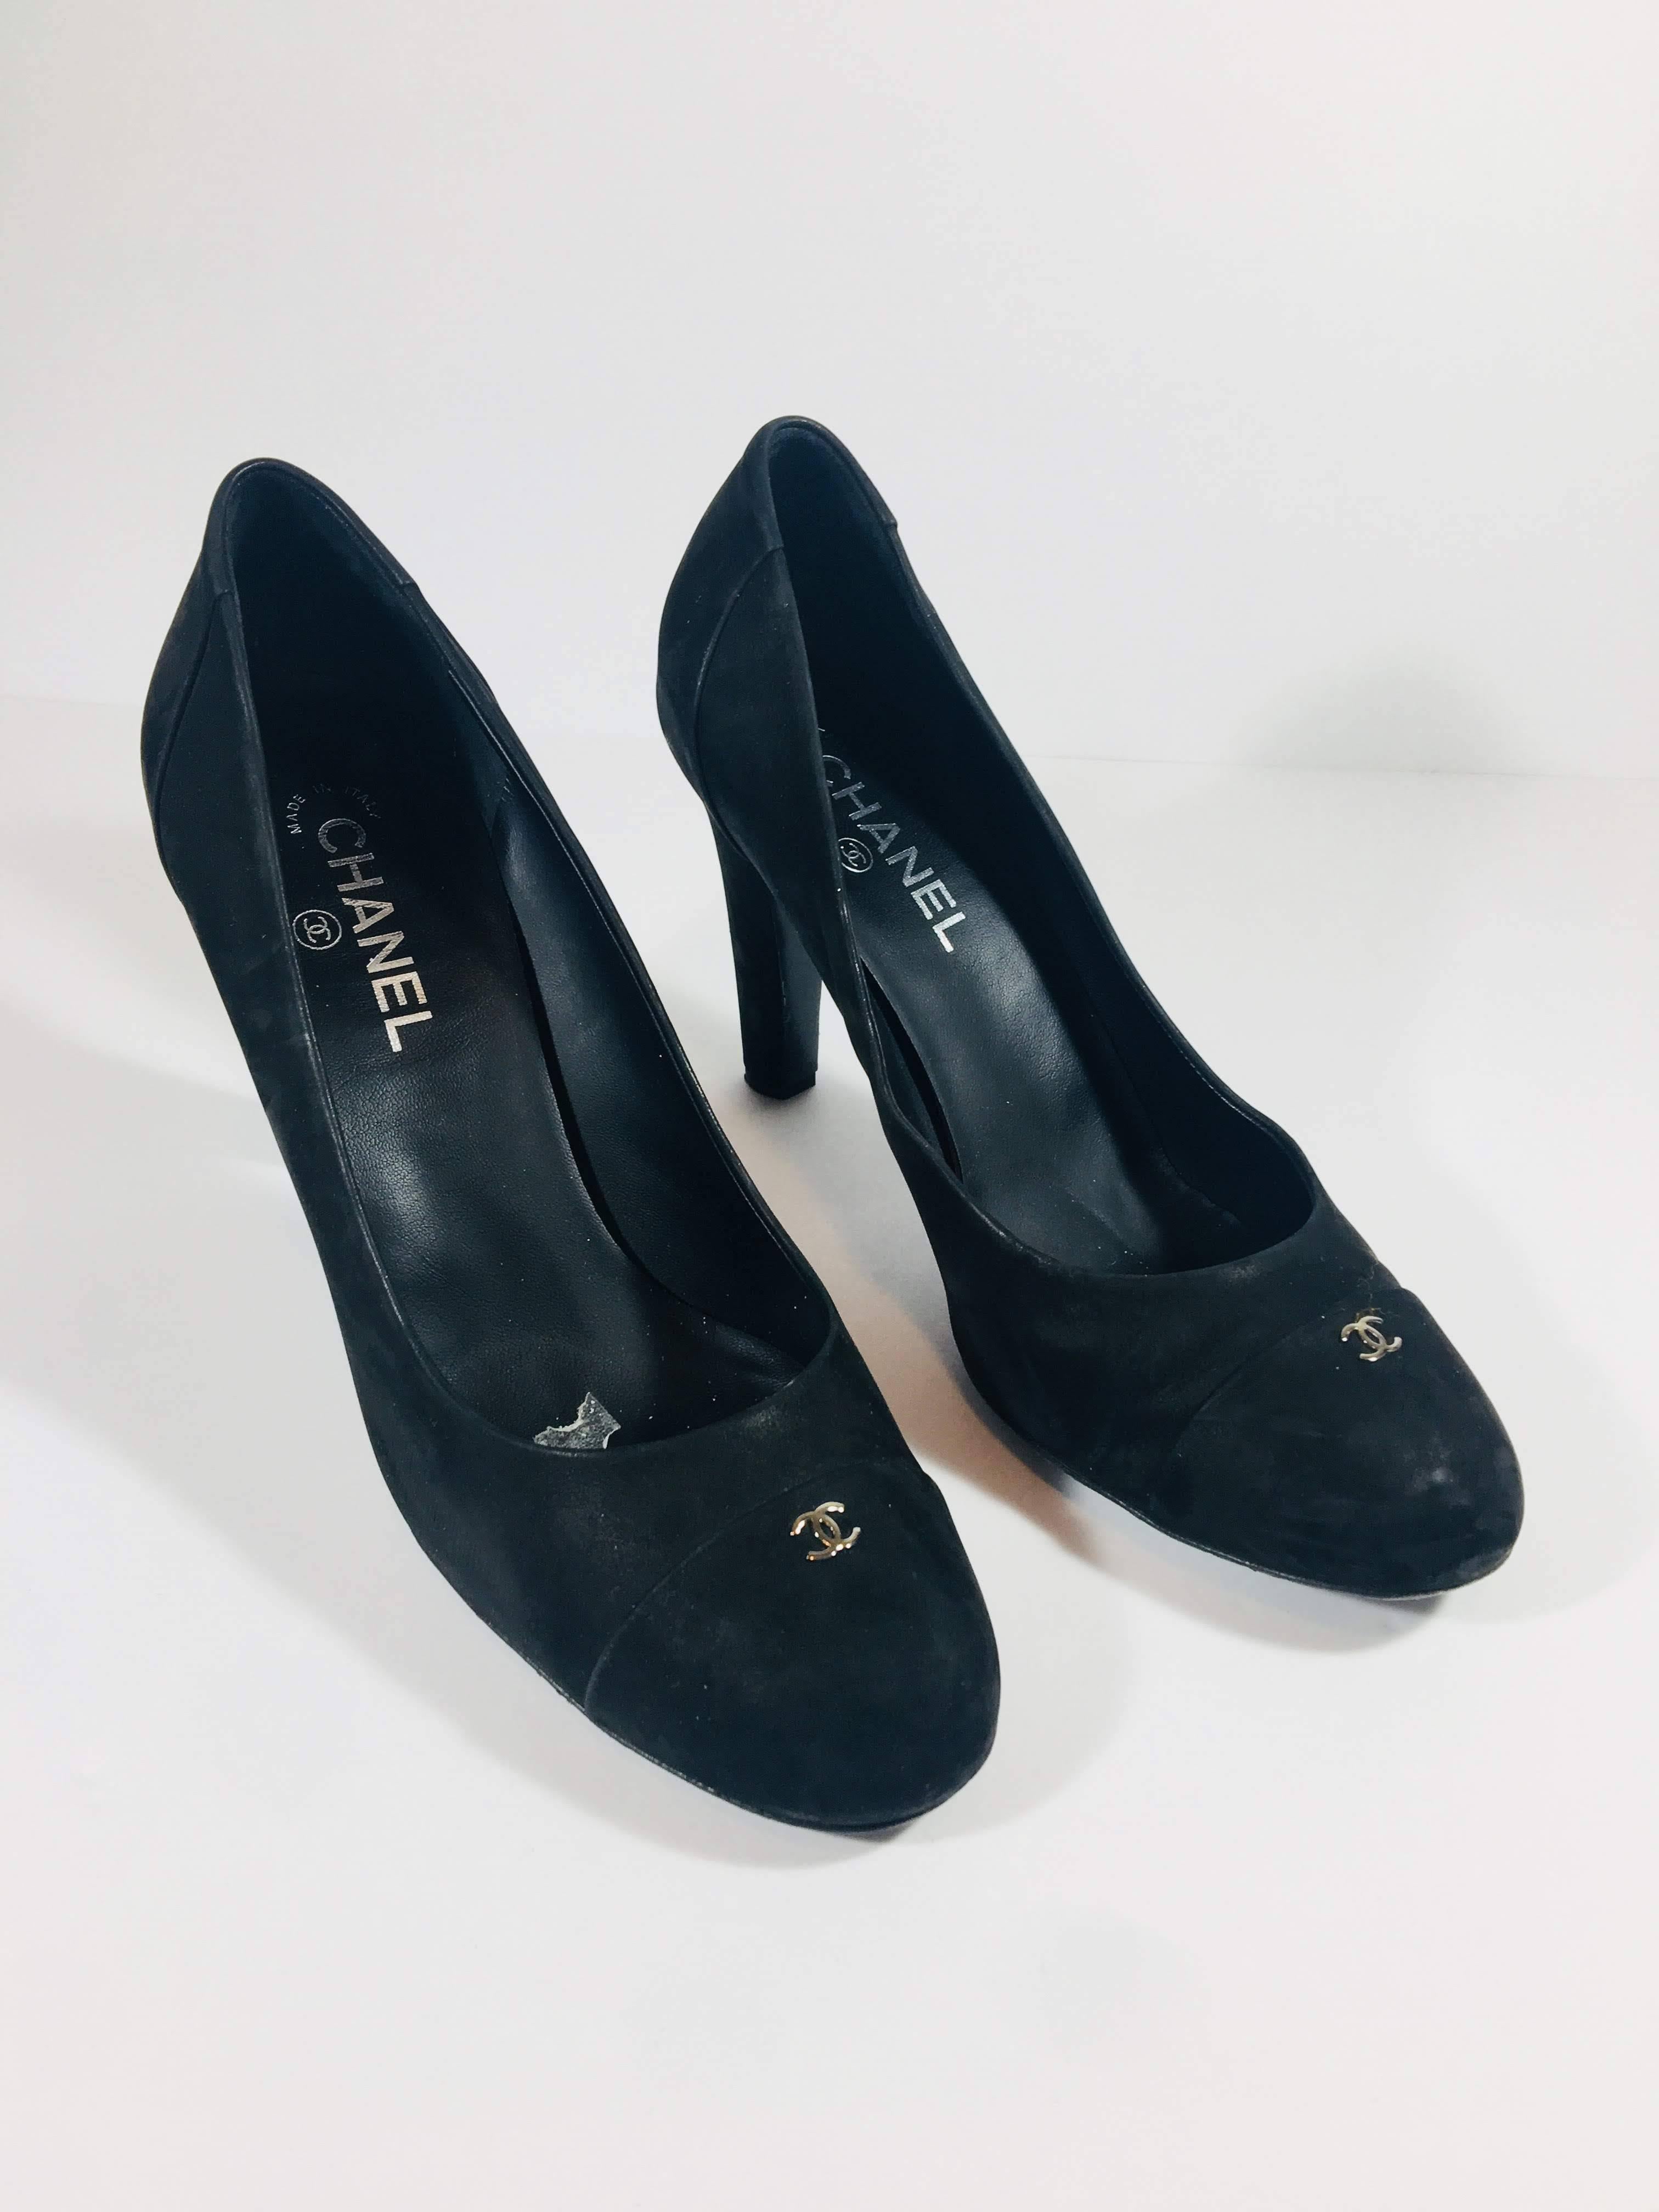 Chanel Black Suede Pumps with Rounded Toe and Silver CC Emblem at Toe and Thick Stiletto Heel. 